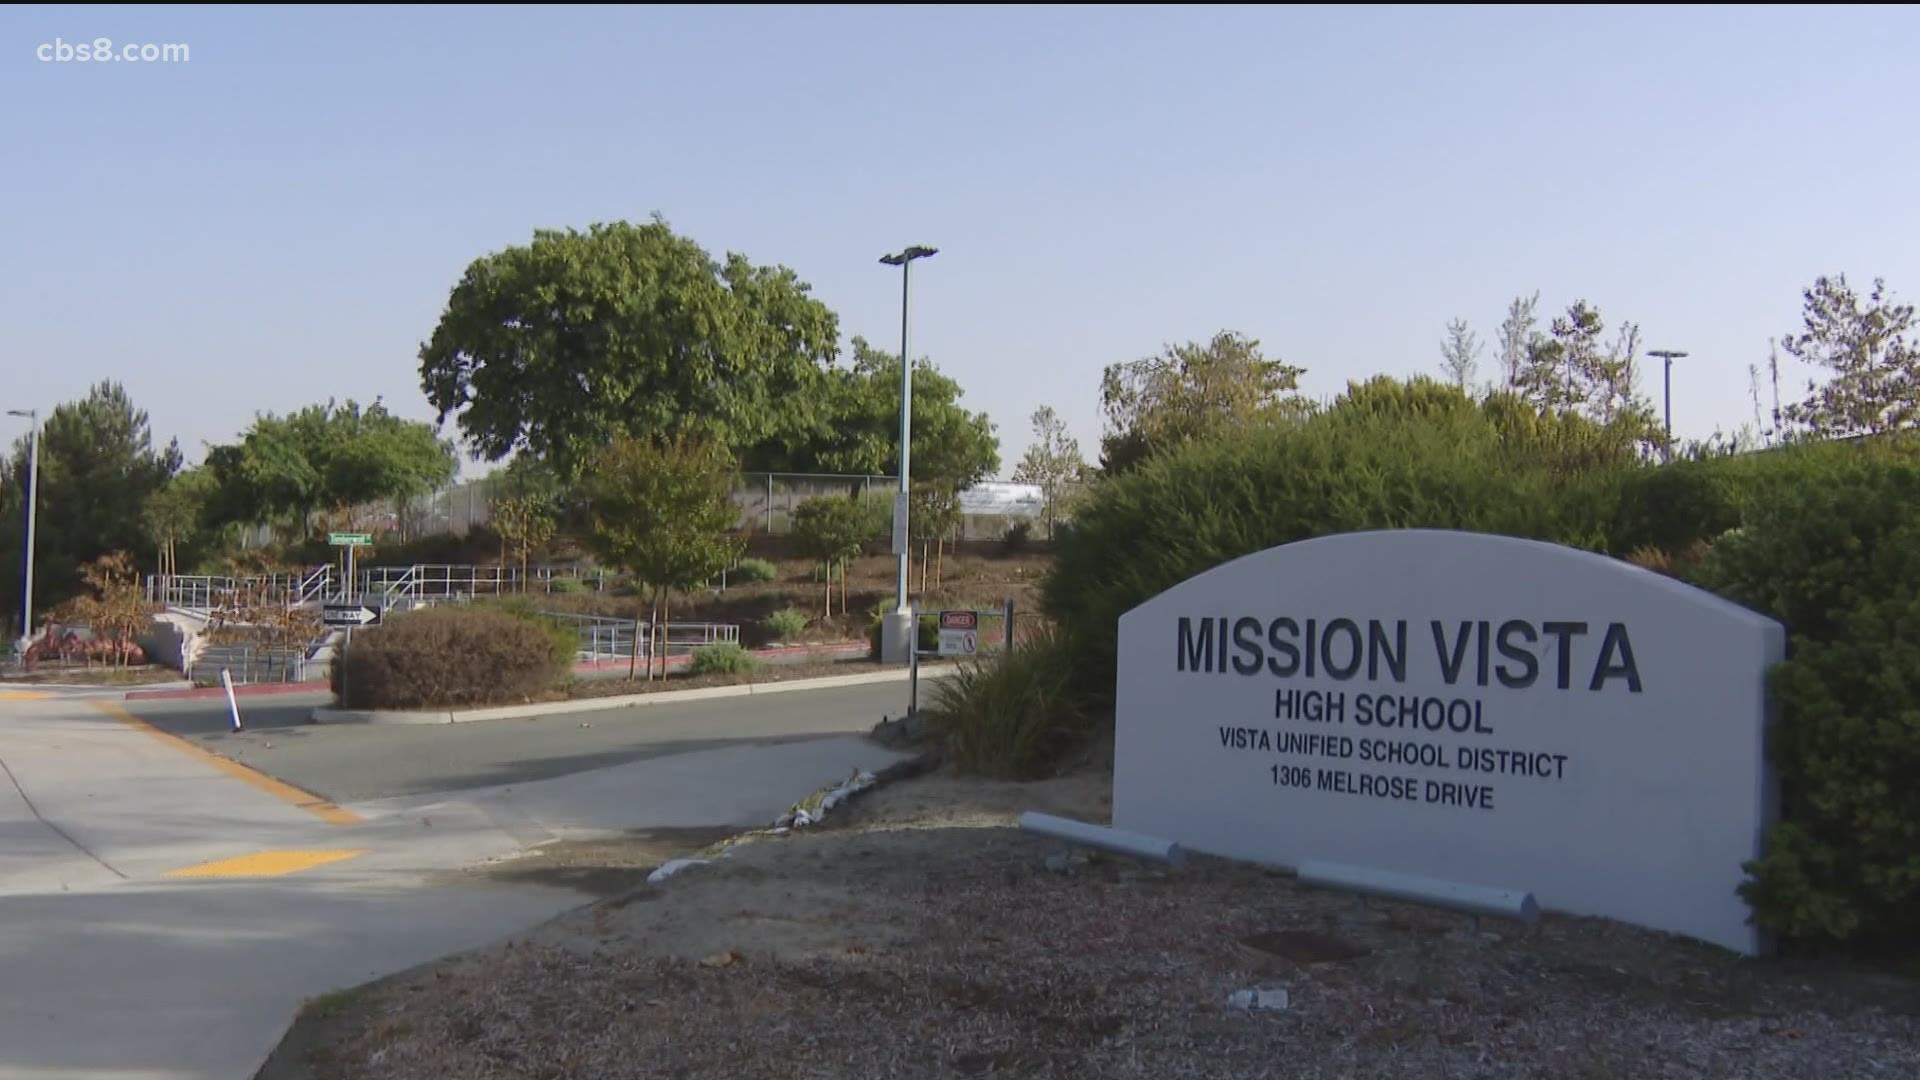 Mission Vista is expected to head back to in-person instruction on Monday, Nov. 9.